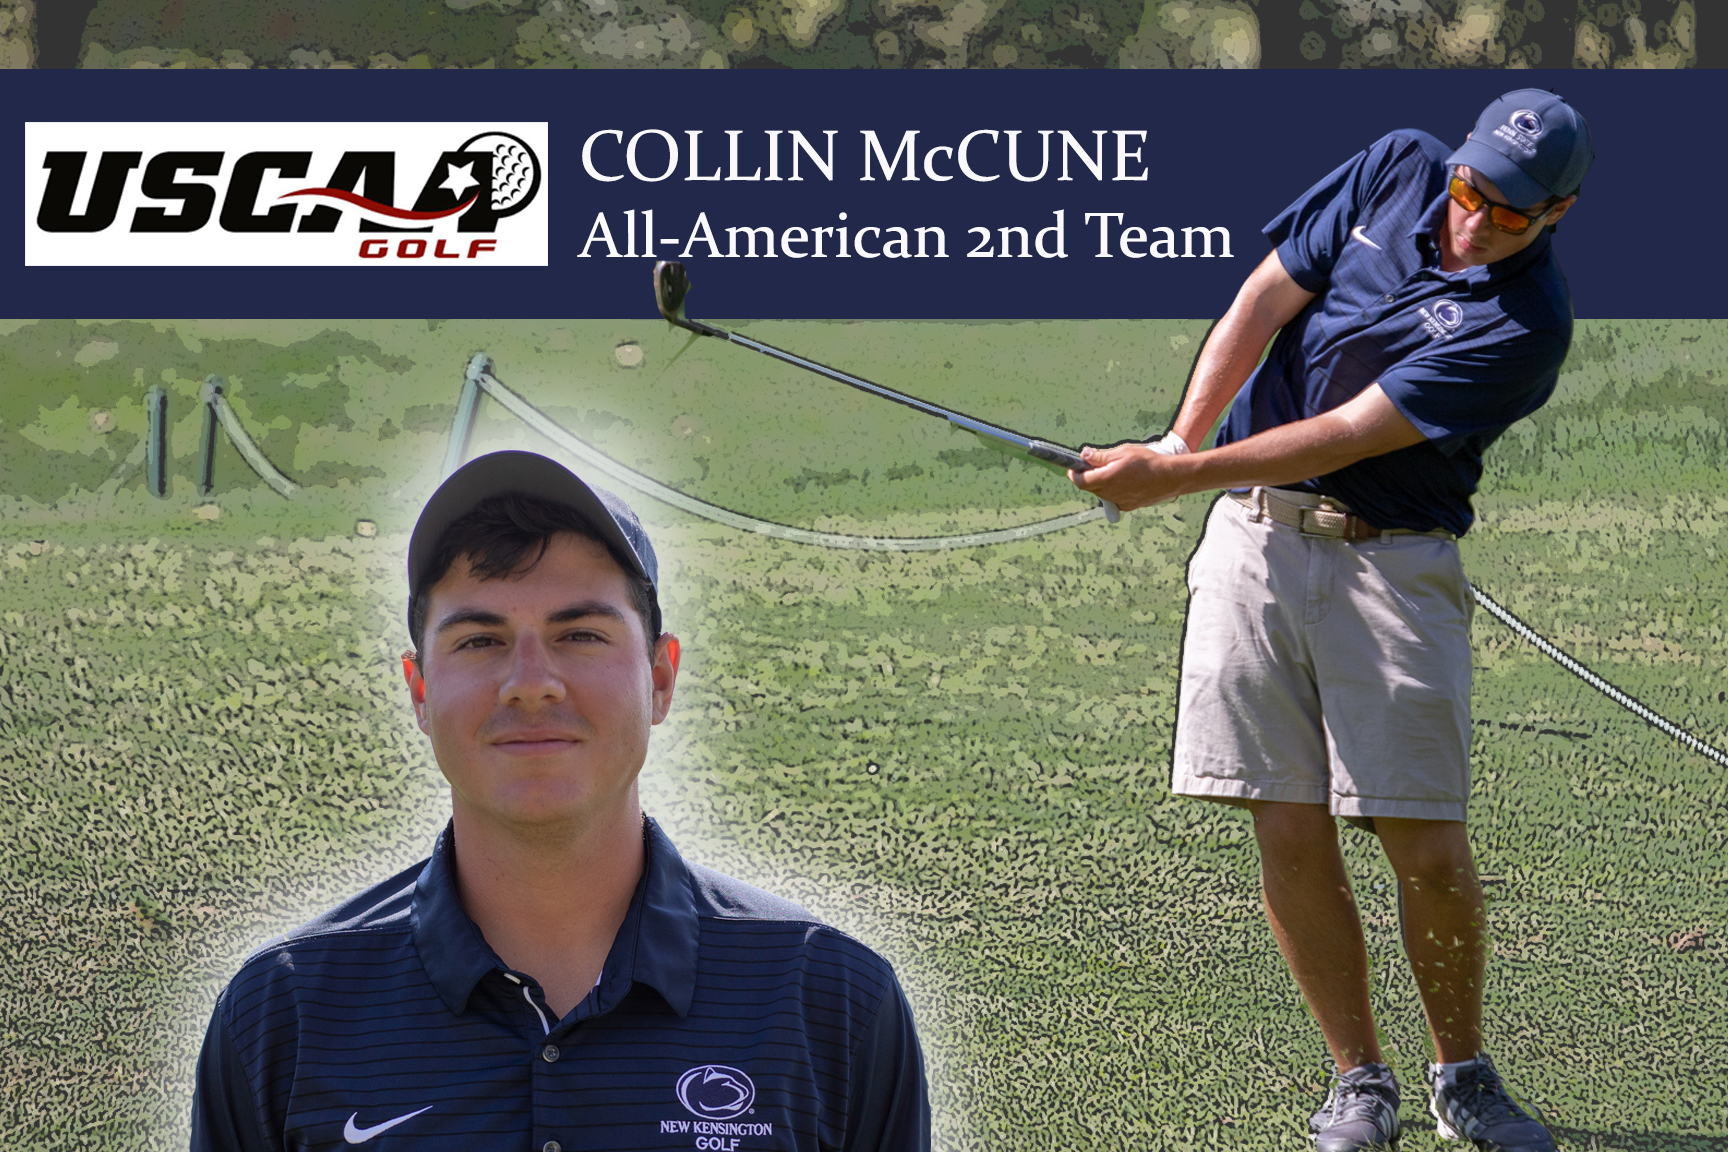 McCune Registers All-American Performance, Places Second in PSUAC